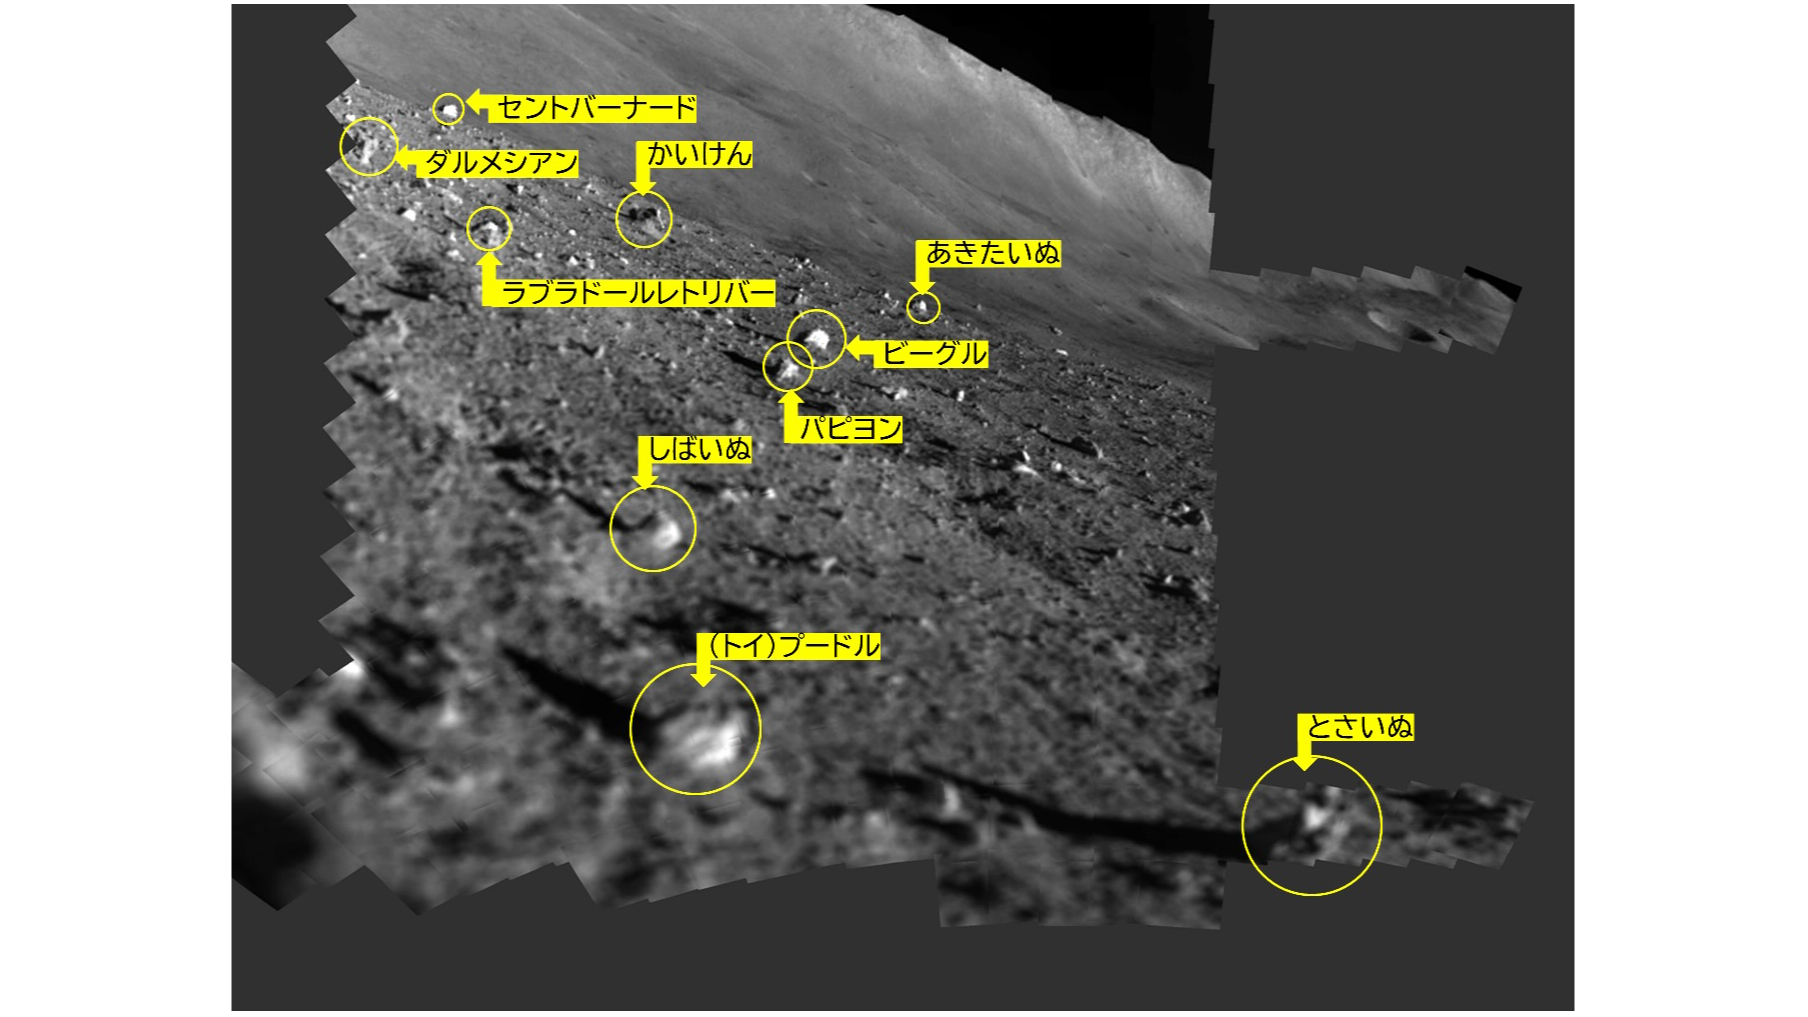 Image of the lunar surface captured by a japanese lander, showing gray dirt, small rocks and a hill in the distance. Some of the rocks are circled in yellow.